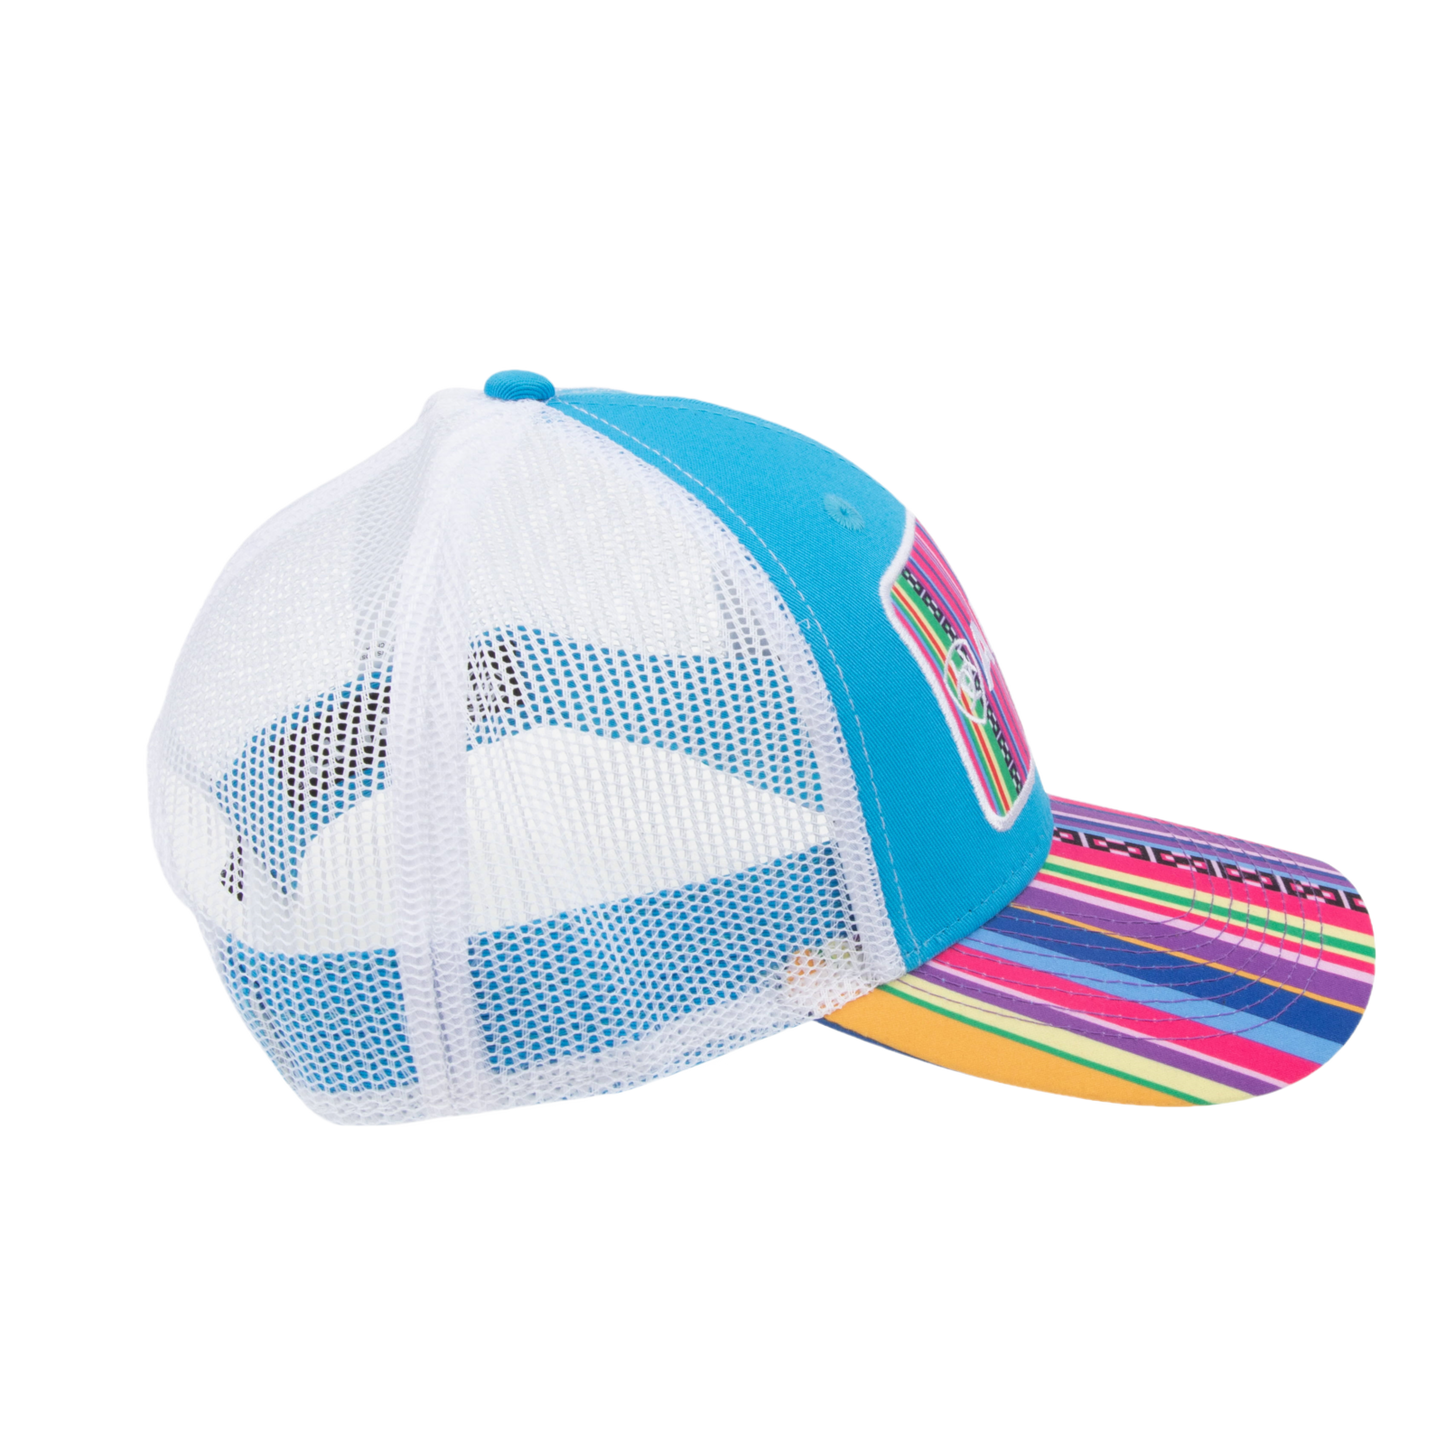 Load image into Gallery viewer, Ariat Ladies Striped Colorful Trucker Cap A300017797
